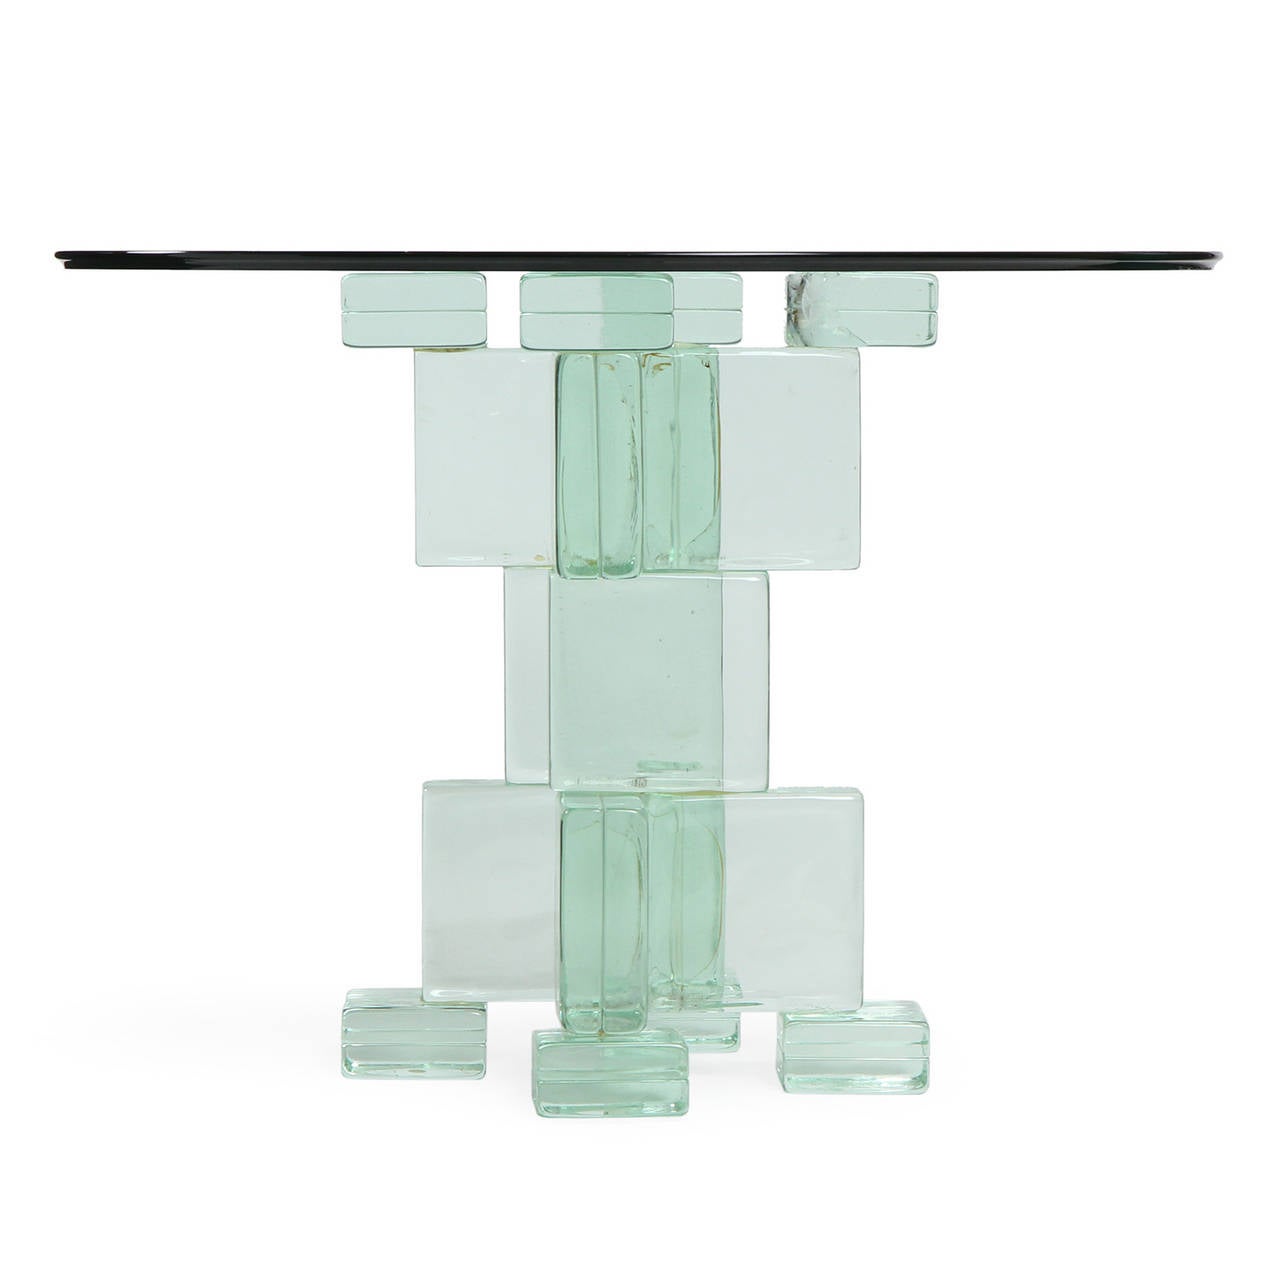 An unusual and masterfully crafted pedestal table having an intricate geometric base fashioned of interconnected square glass blocks that support a floating circular glass top.